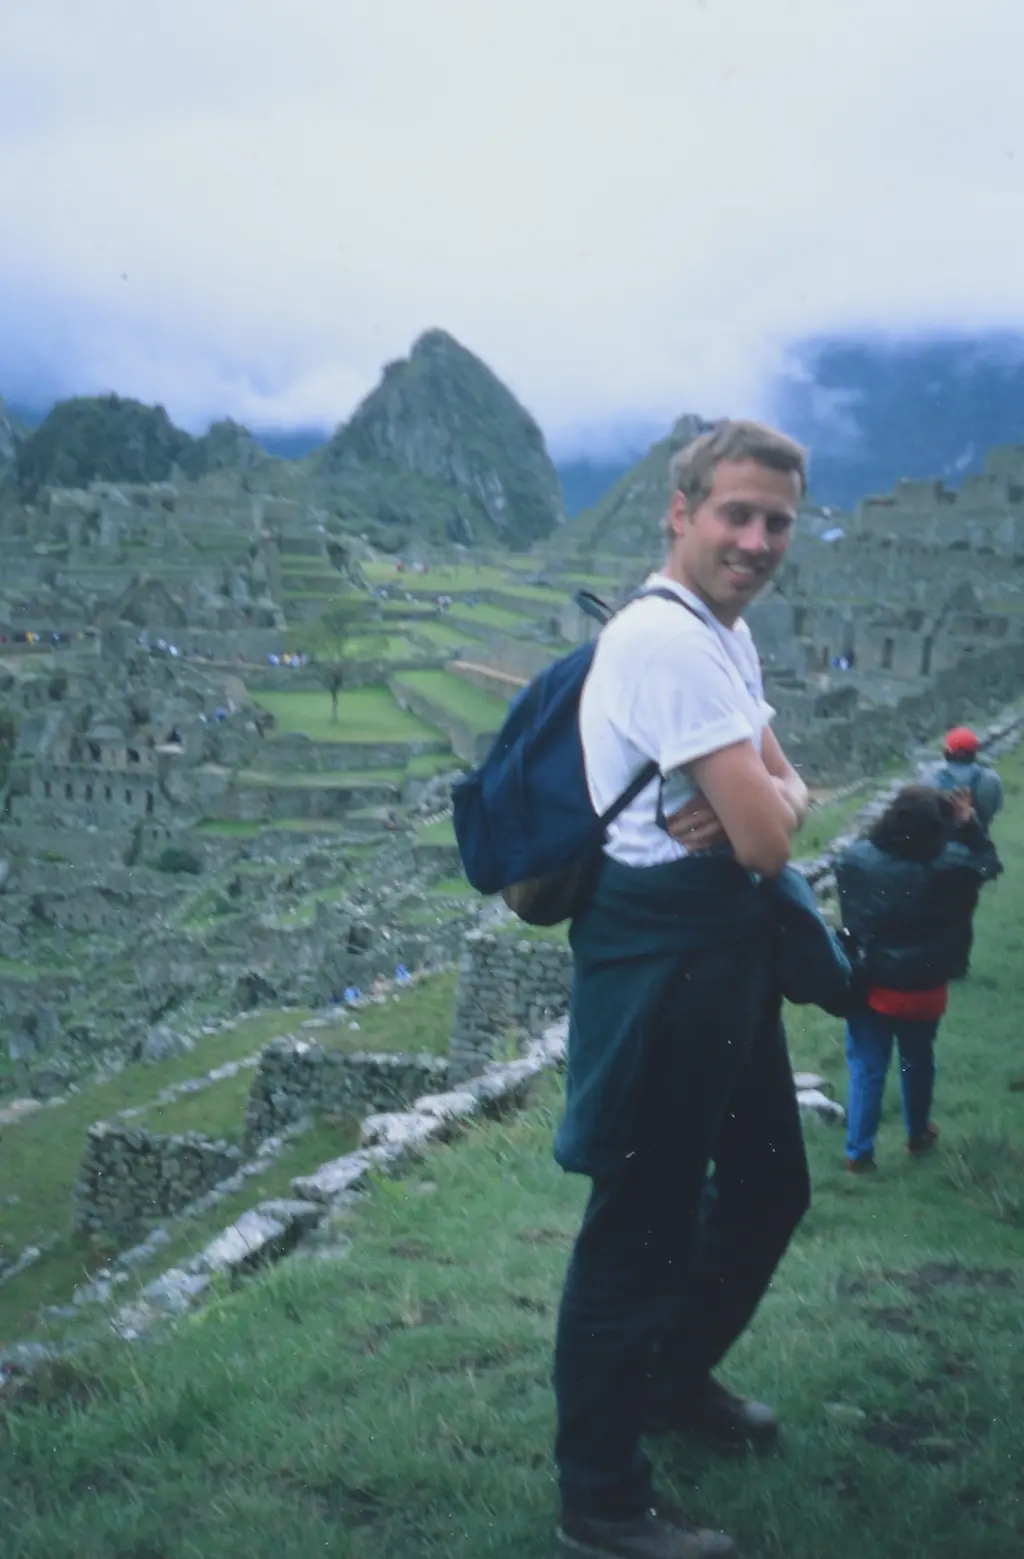 RTI scientist Richard Reithinger, shown in a photo from his time in graduate school in Peru.